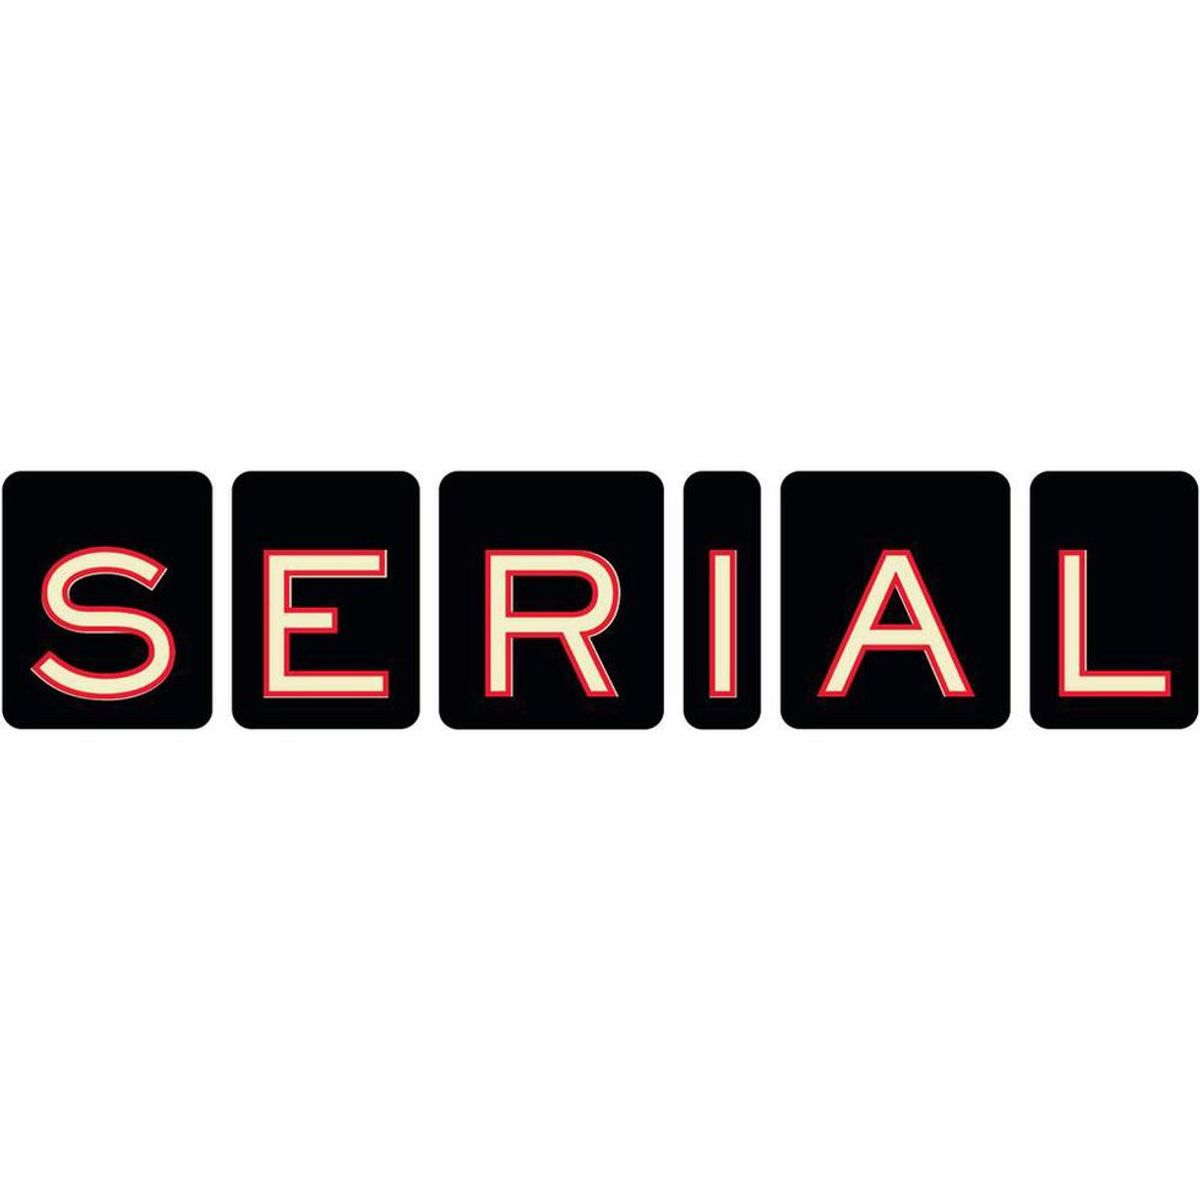 Why You Need To Listen To Serial